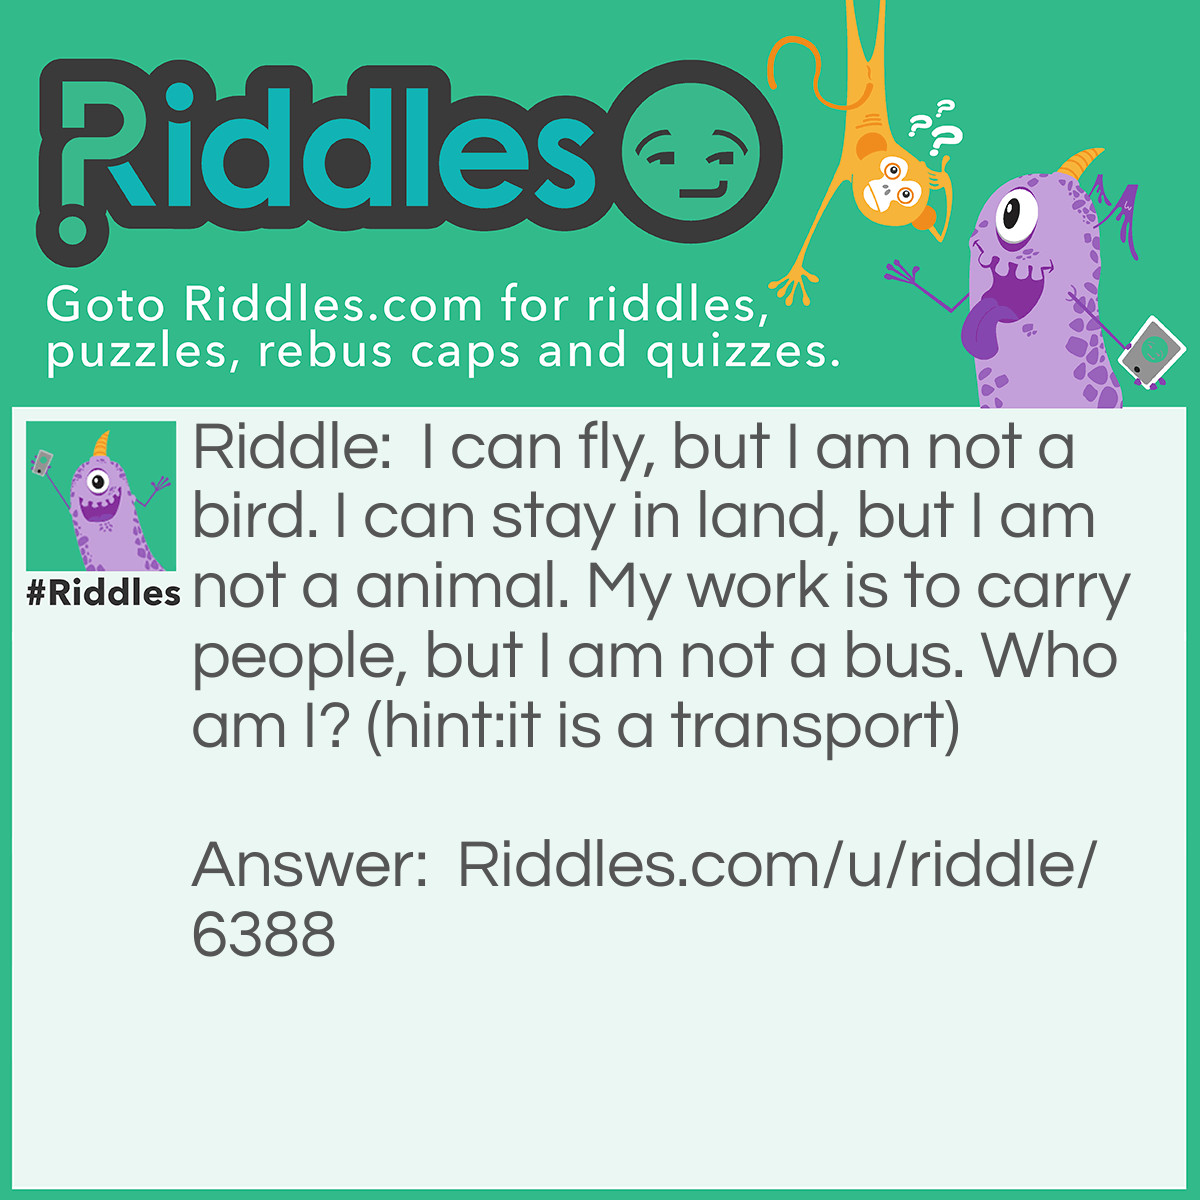 Riddle: I can fly, but I am not a bird. I can stay in land, but I am not a animal. My work is to carry people, but I am not a bus. Who am I? (hint:it is a transport) Answer: Aeroplane.